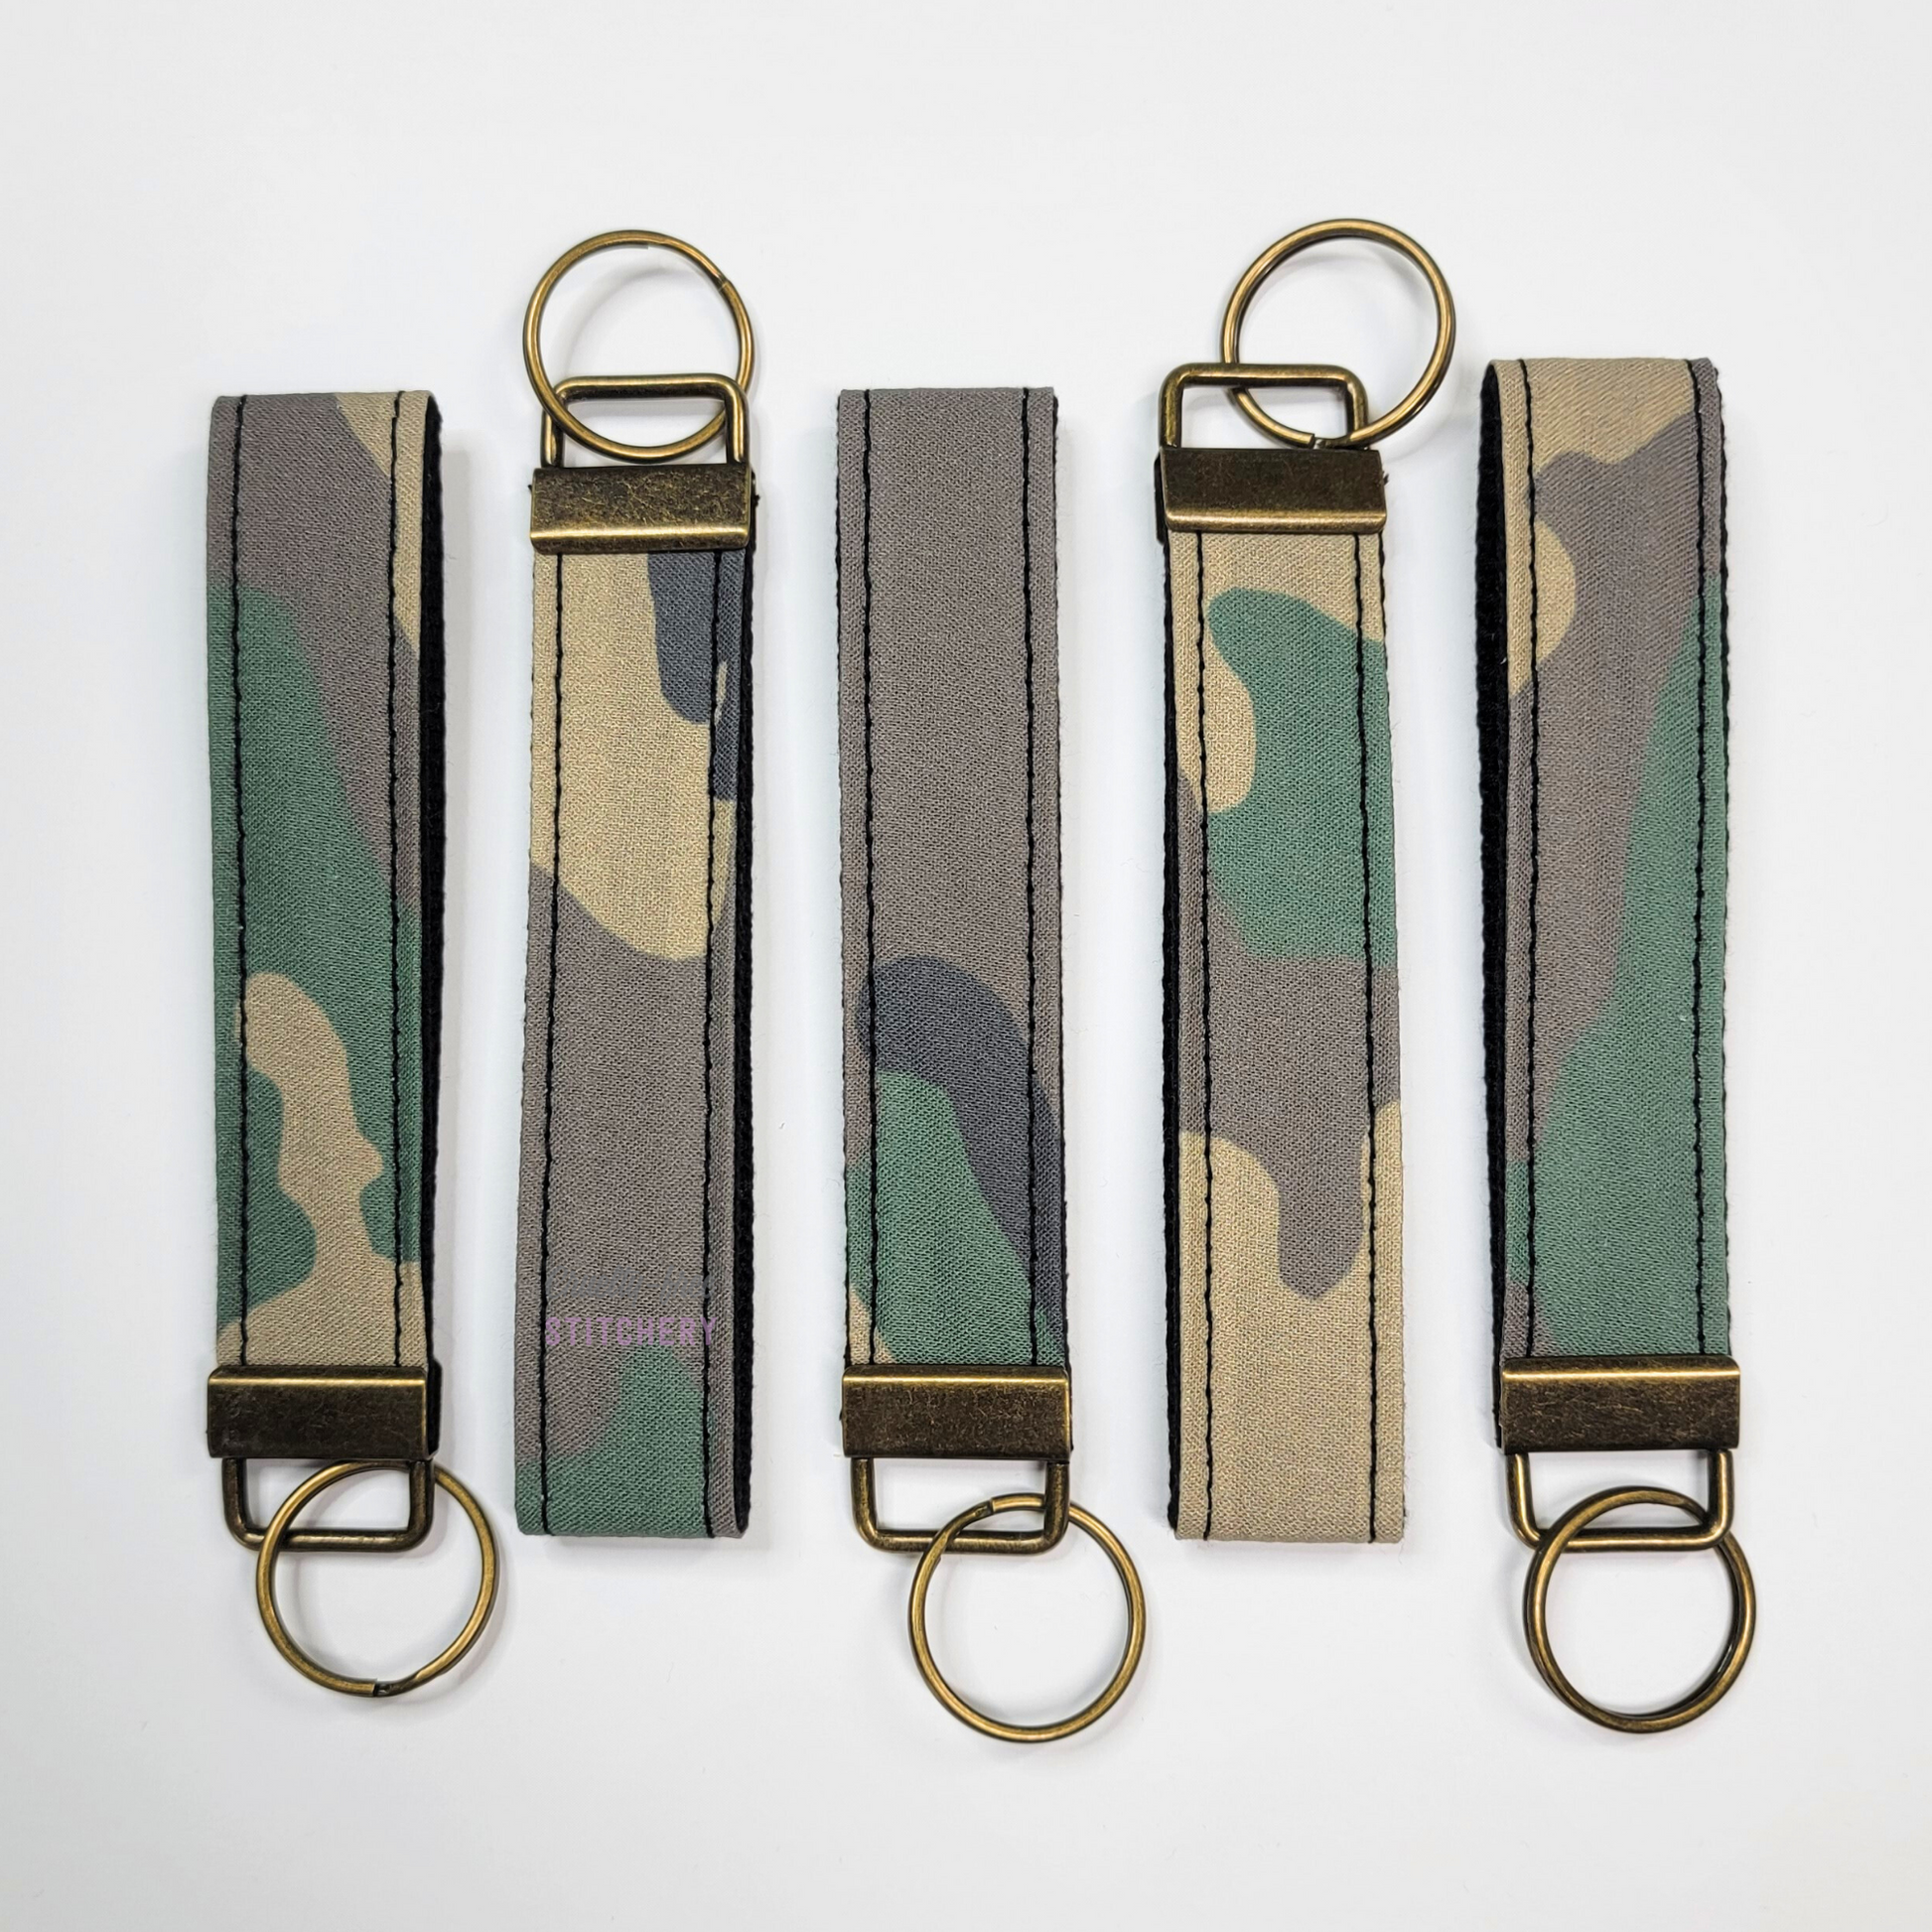 Camo print key fobs in alternating directions. 